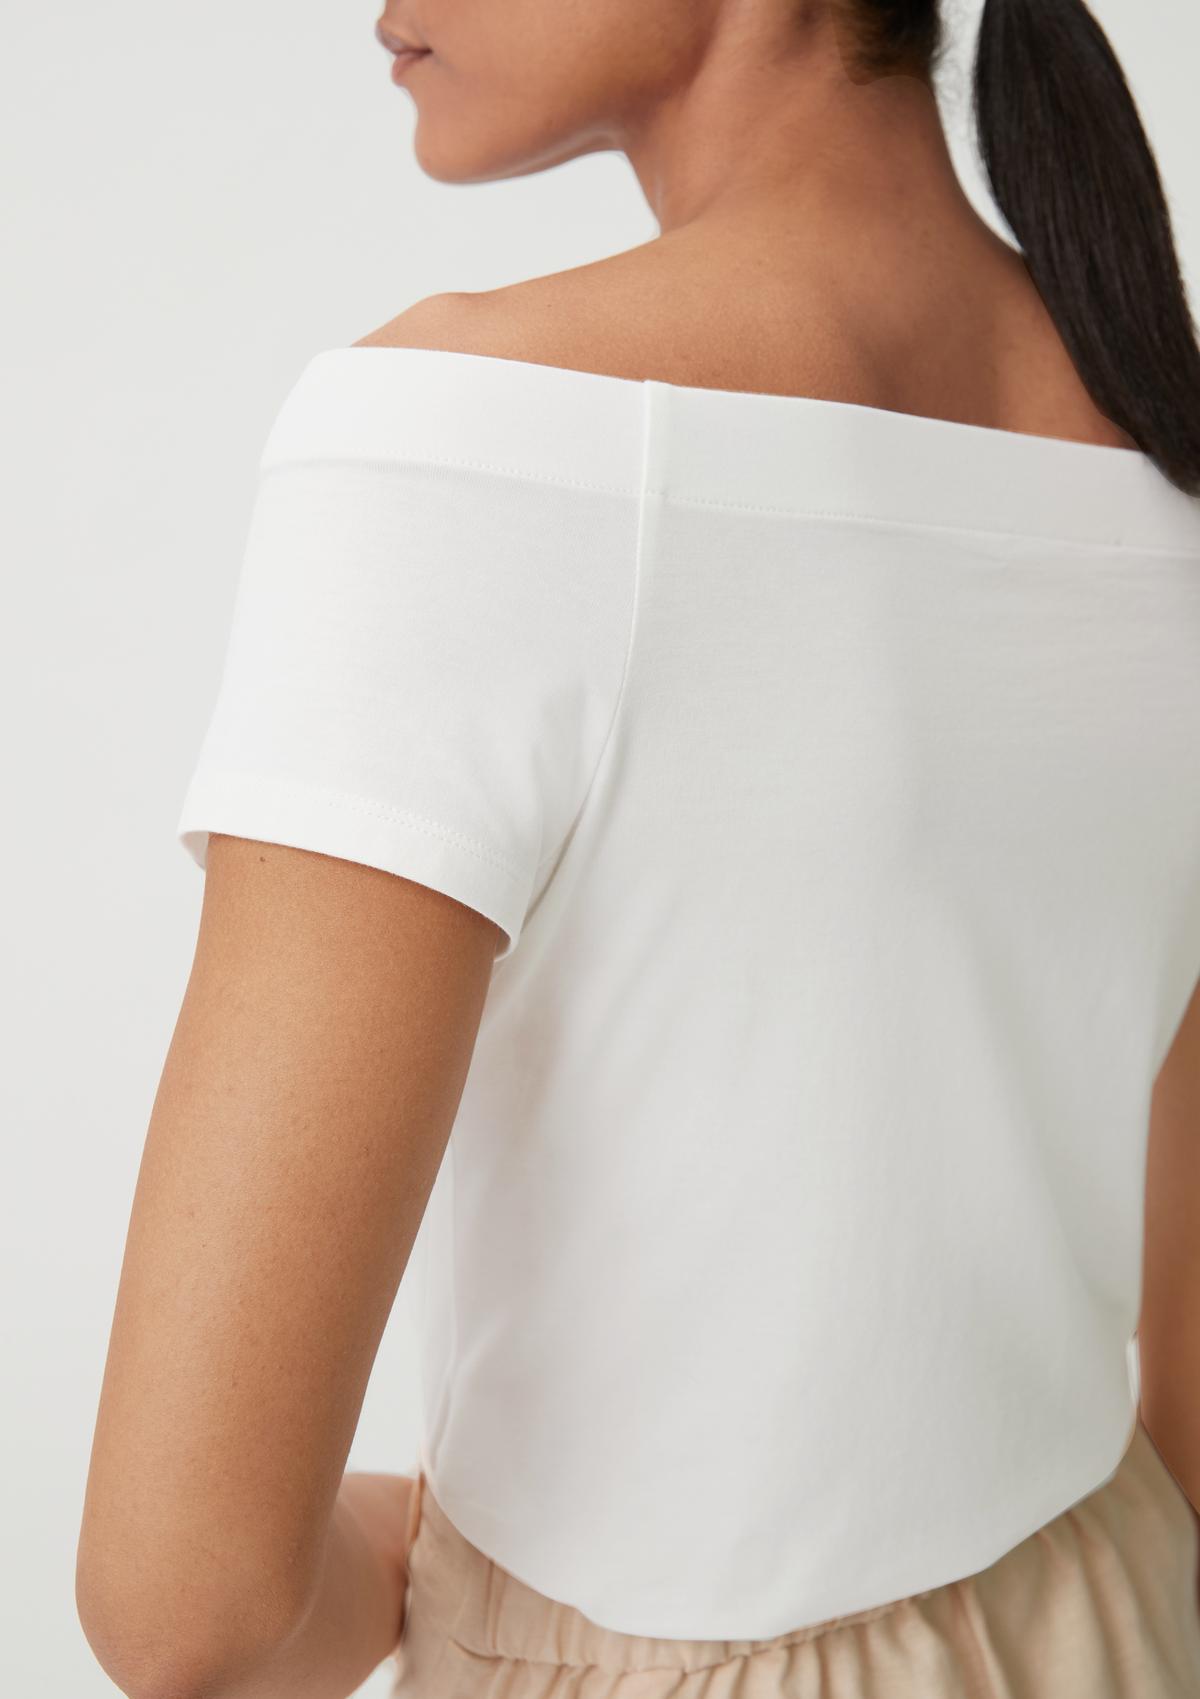 comma T-shirt in an off-the-shoulder style